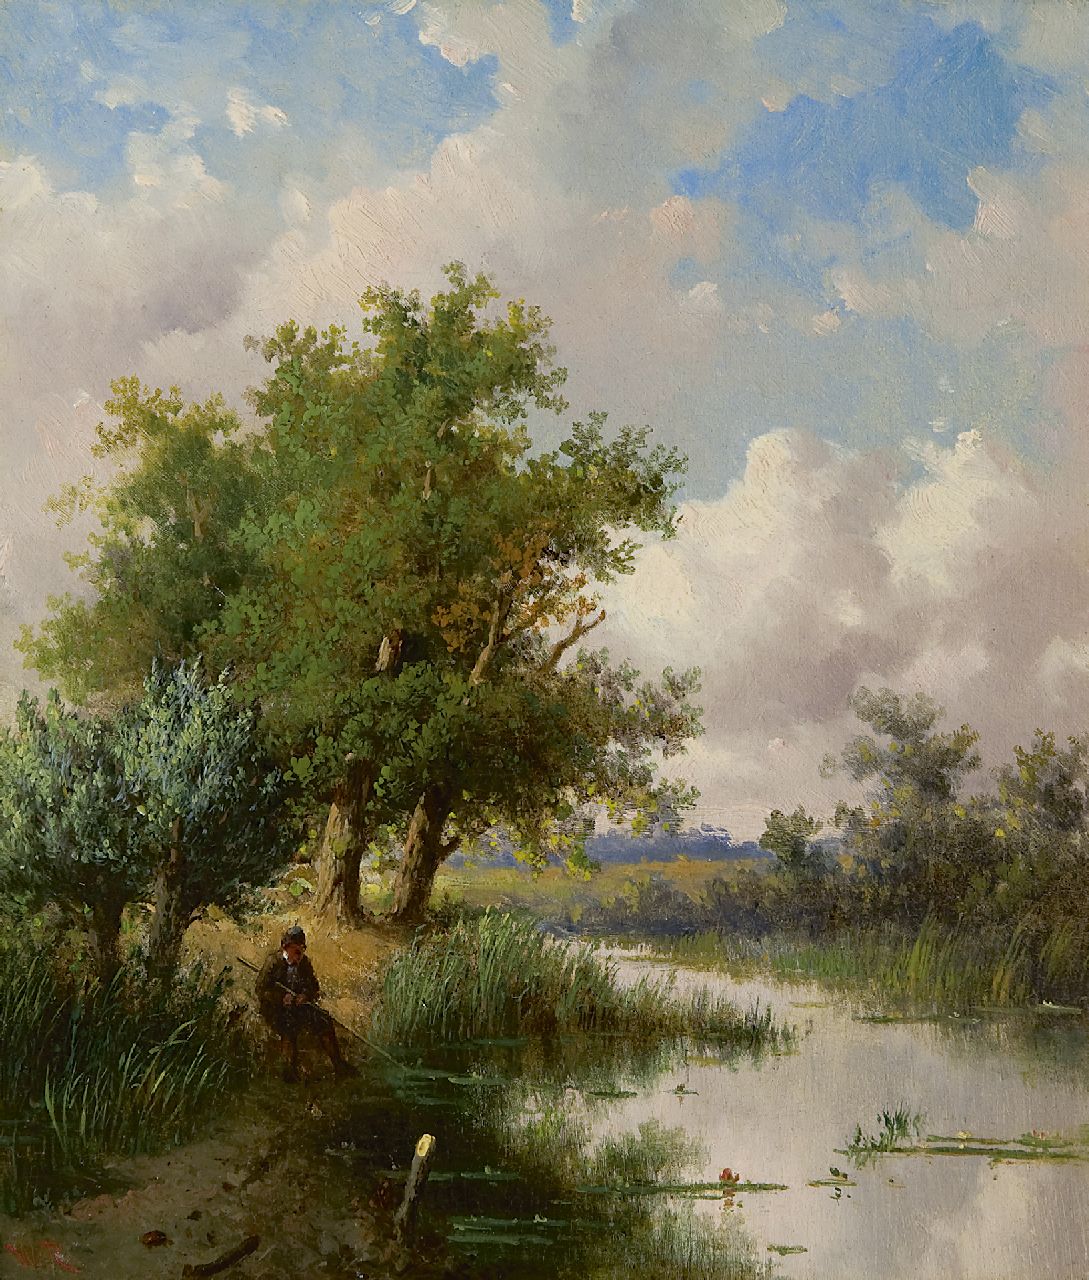 Meiners C.H.  | Claas Hendrik Meiners | Paintings offered for sale | A fisherman at a brook, oil on panel 24.6 x 21.6 cm